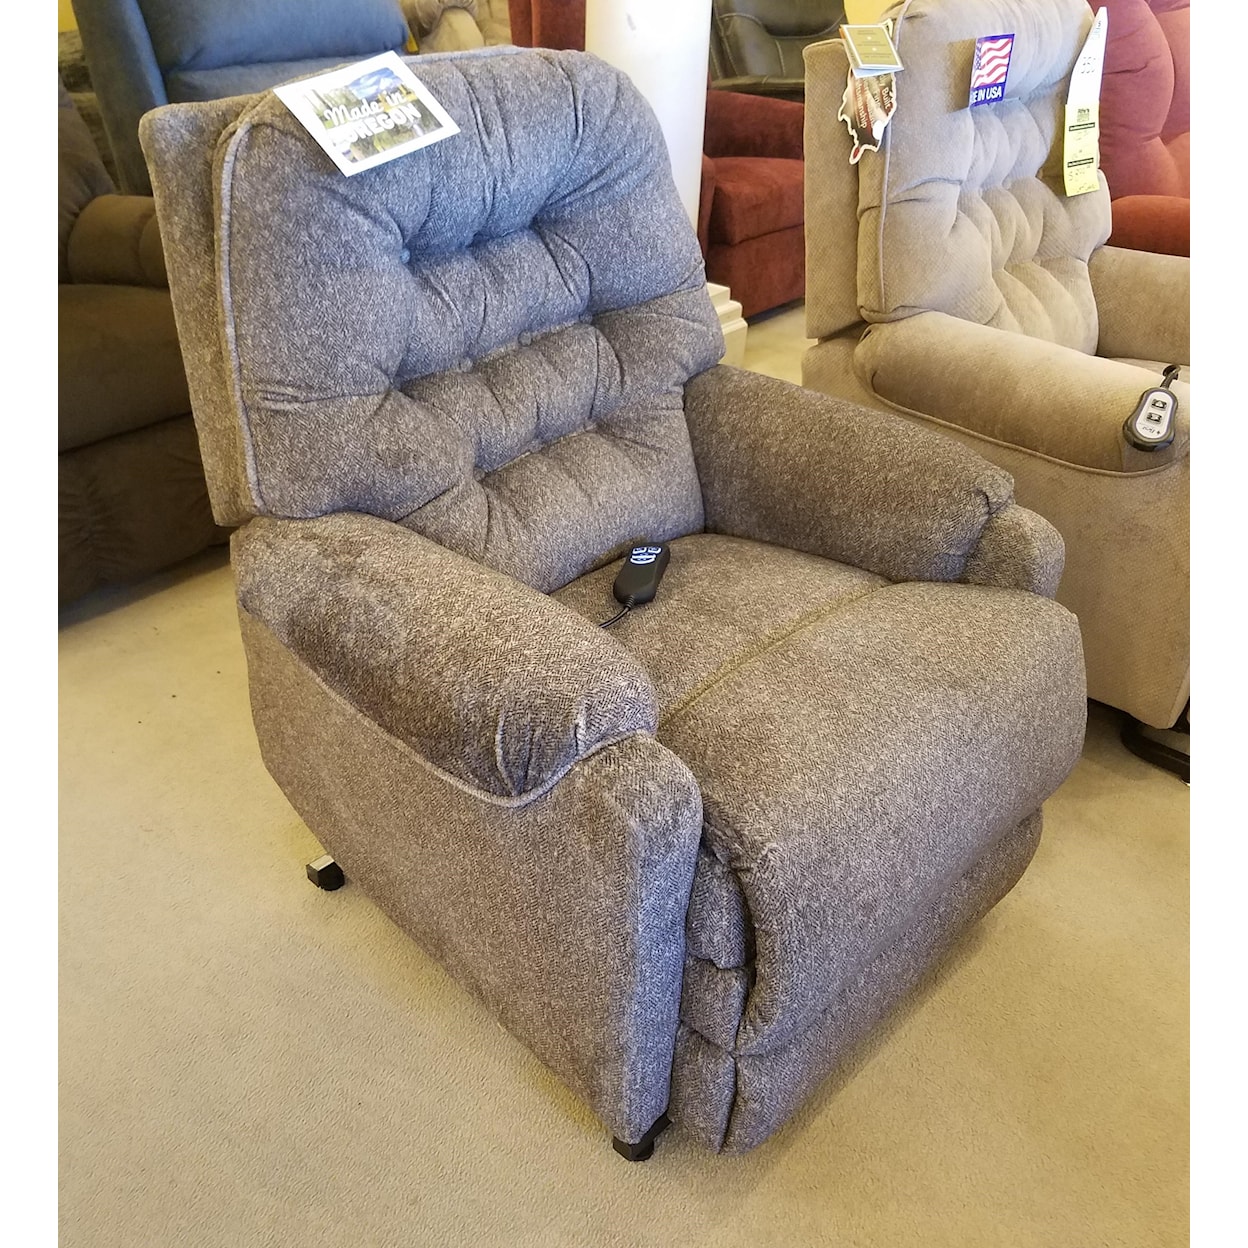 Stanton 873 Pwr Lift Chair